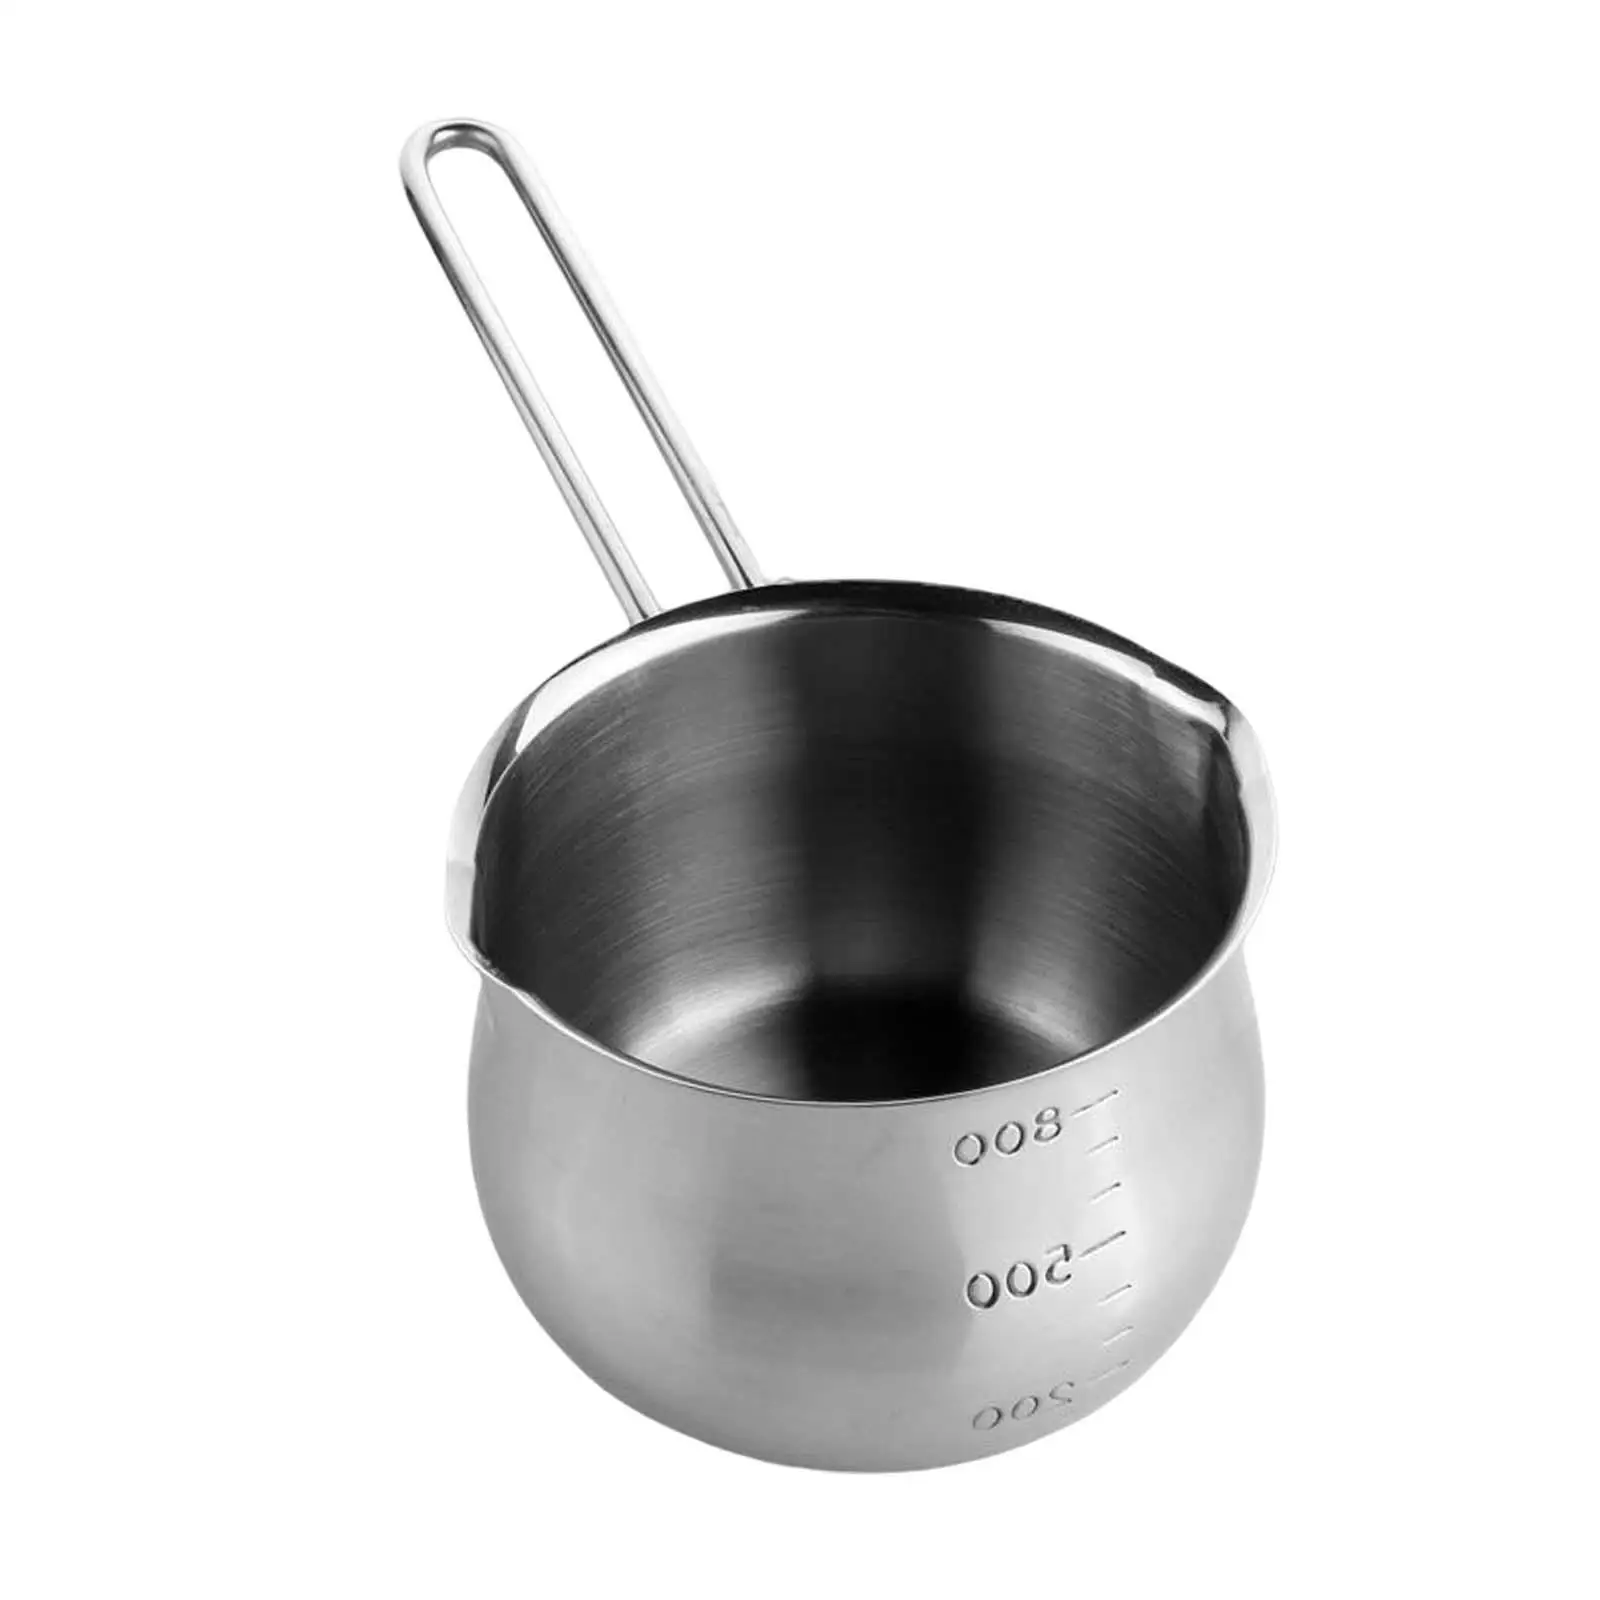 Small Milk Pot for Melting Breakfast Pot, Cookware, Coffee Pot with Handle